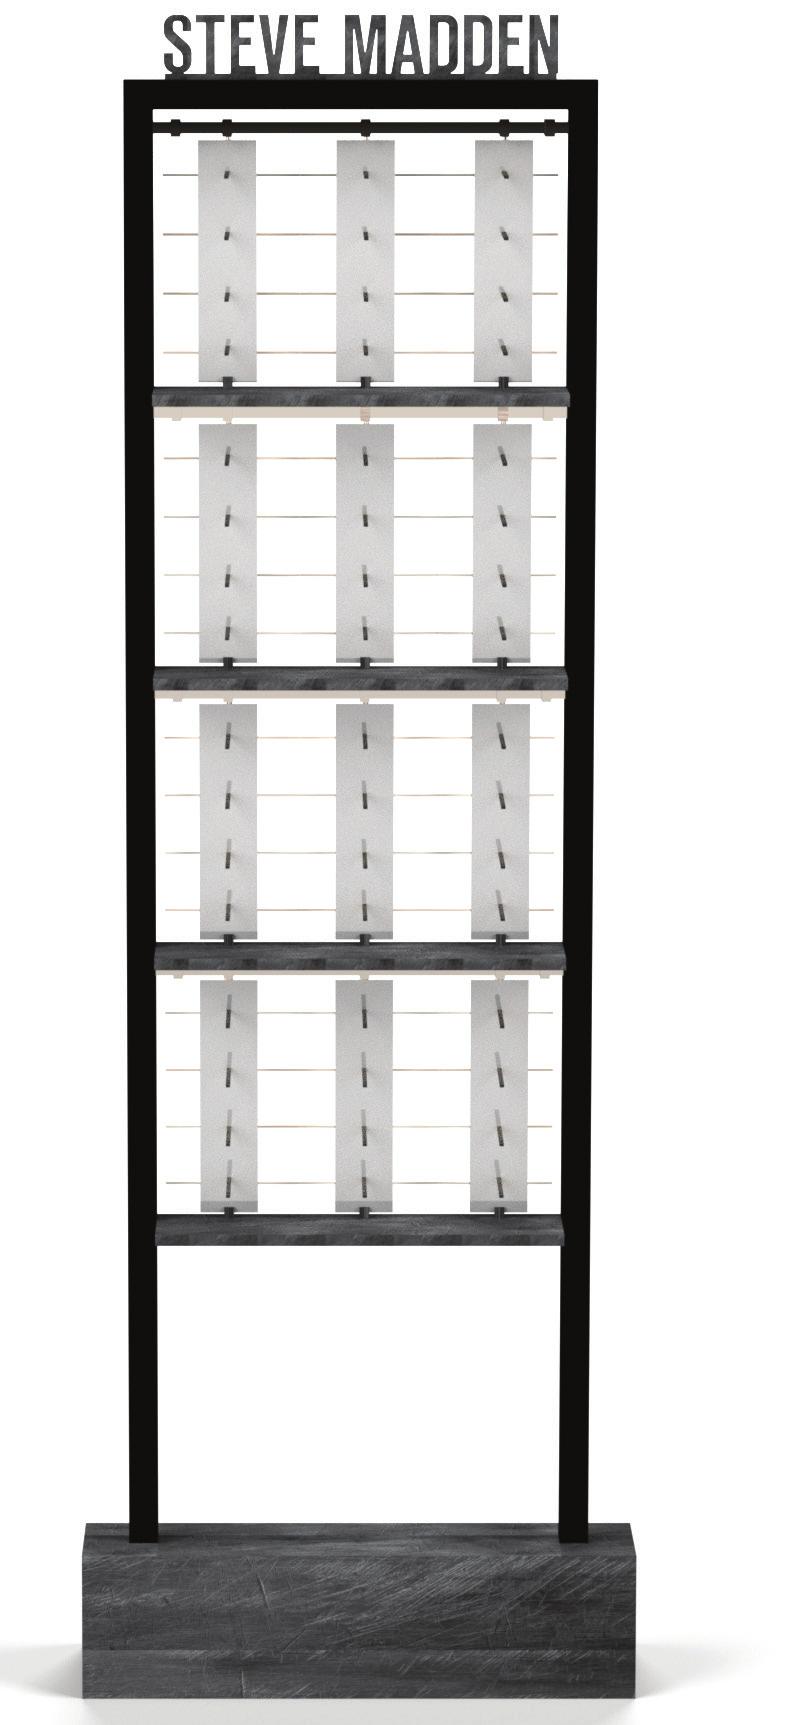 Select (1) 48 piece display if requested (optional) LEVEL 3 SM, 48 OR BEP,